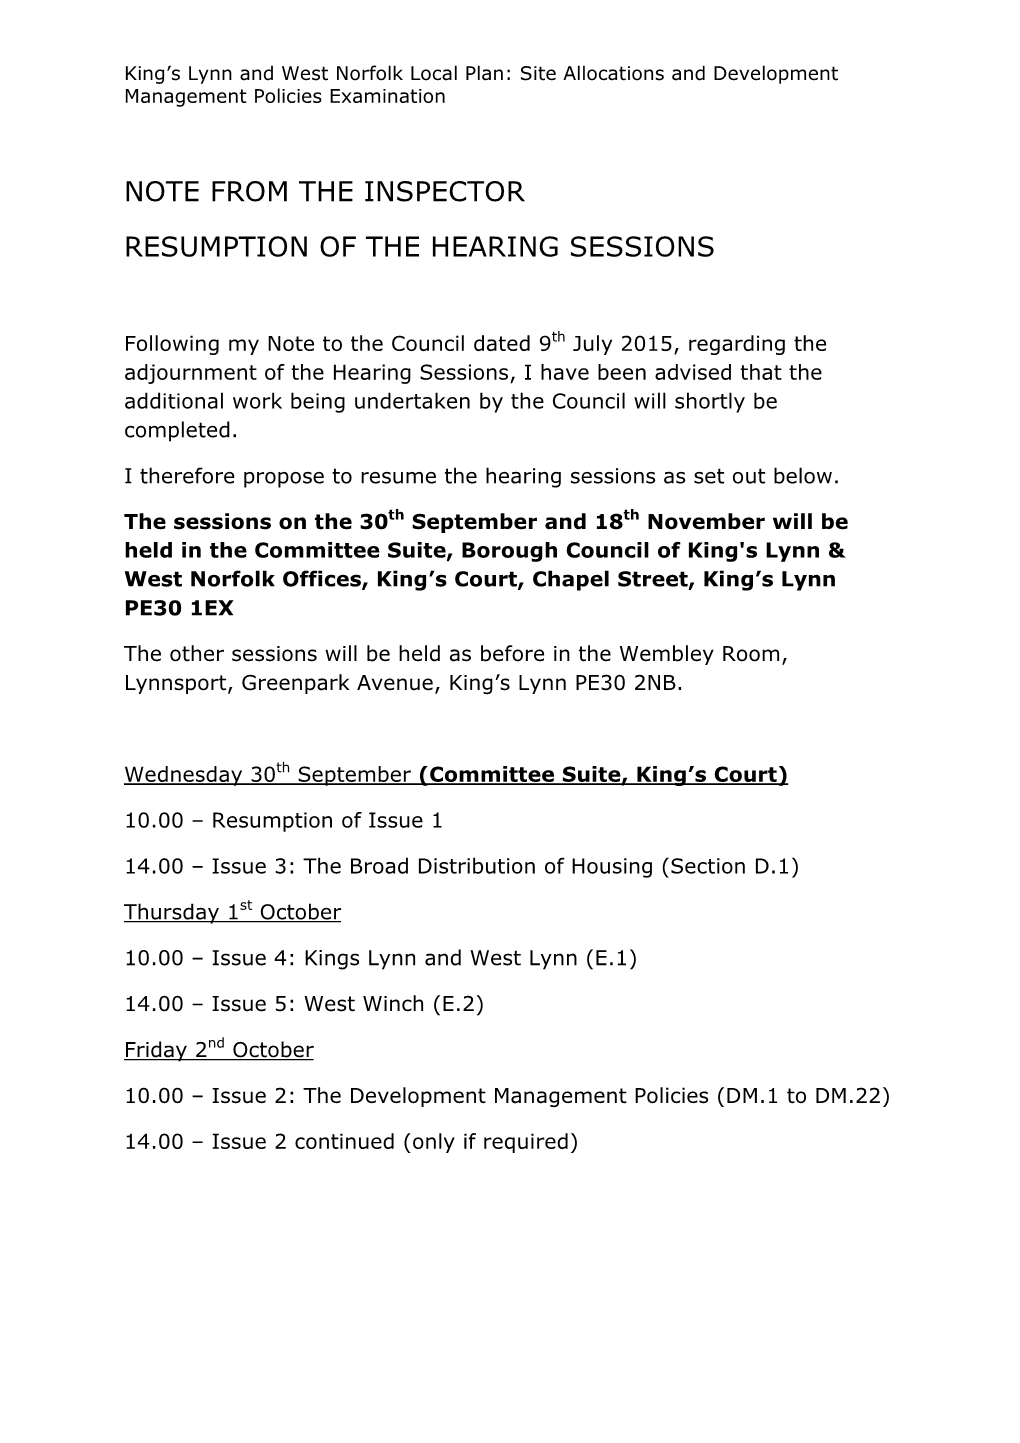 Note from the Inspector Resumption of the Hearing